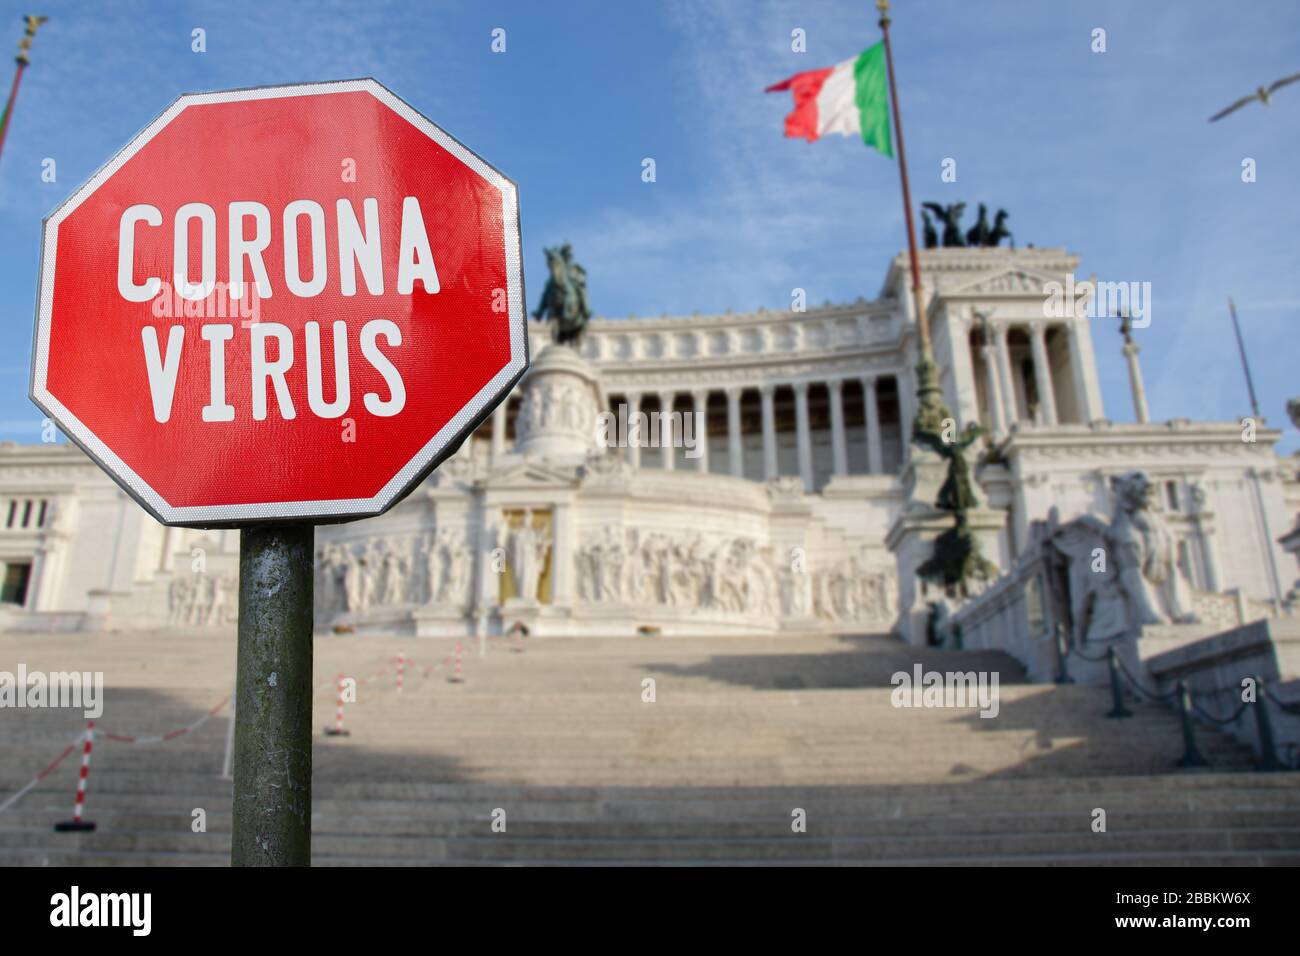 Corona virus sign with Altar of the Fatherland in Rome, Italy. Coronavirus pandemic outbreak concept in north Italy. Stock Photo